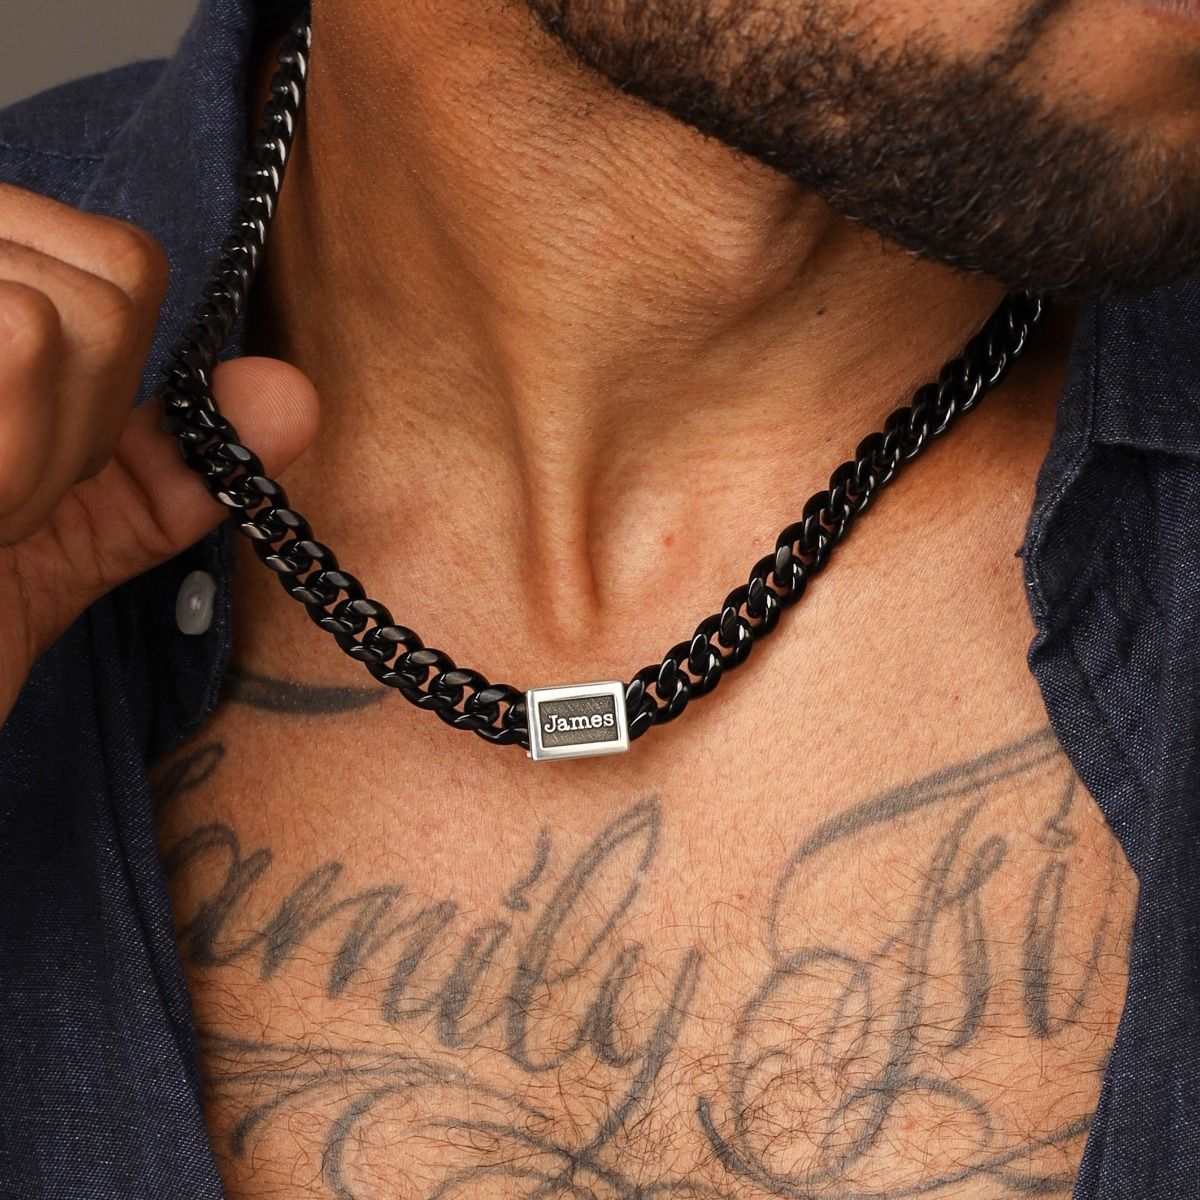 Dark Cuban Link Chain Necklace - Black Chain for Men by Talisa Jewelry